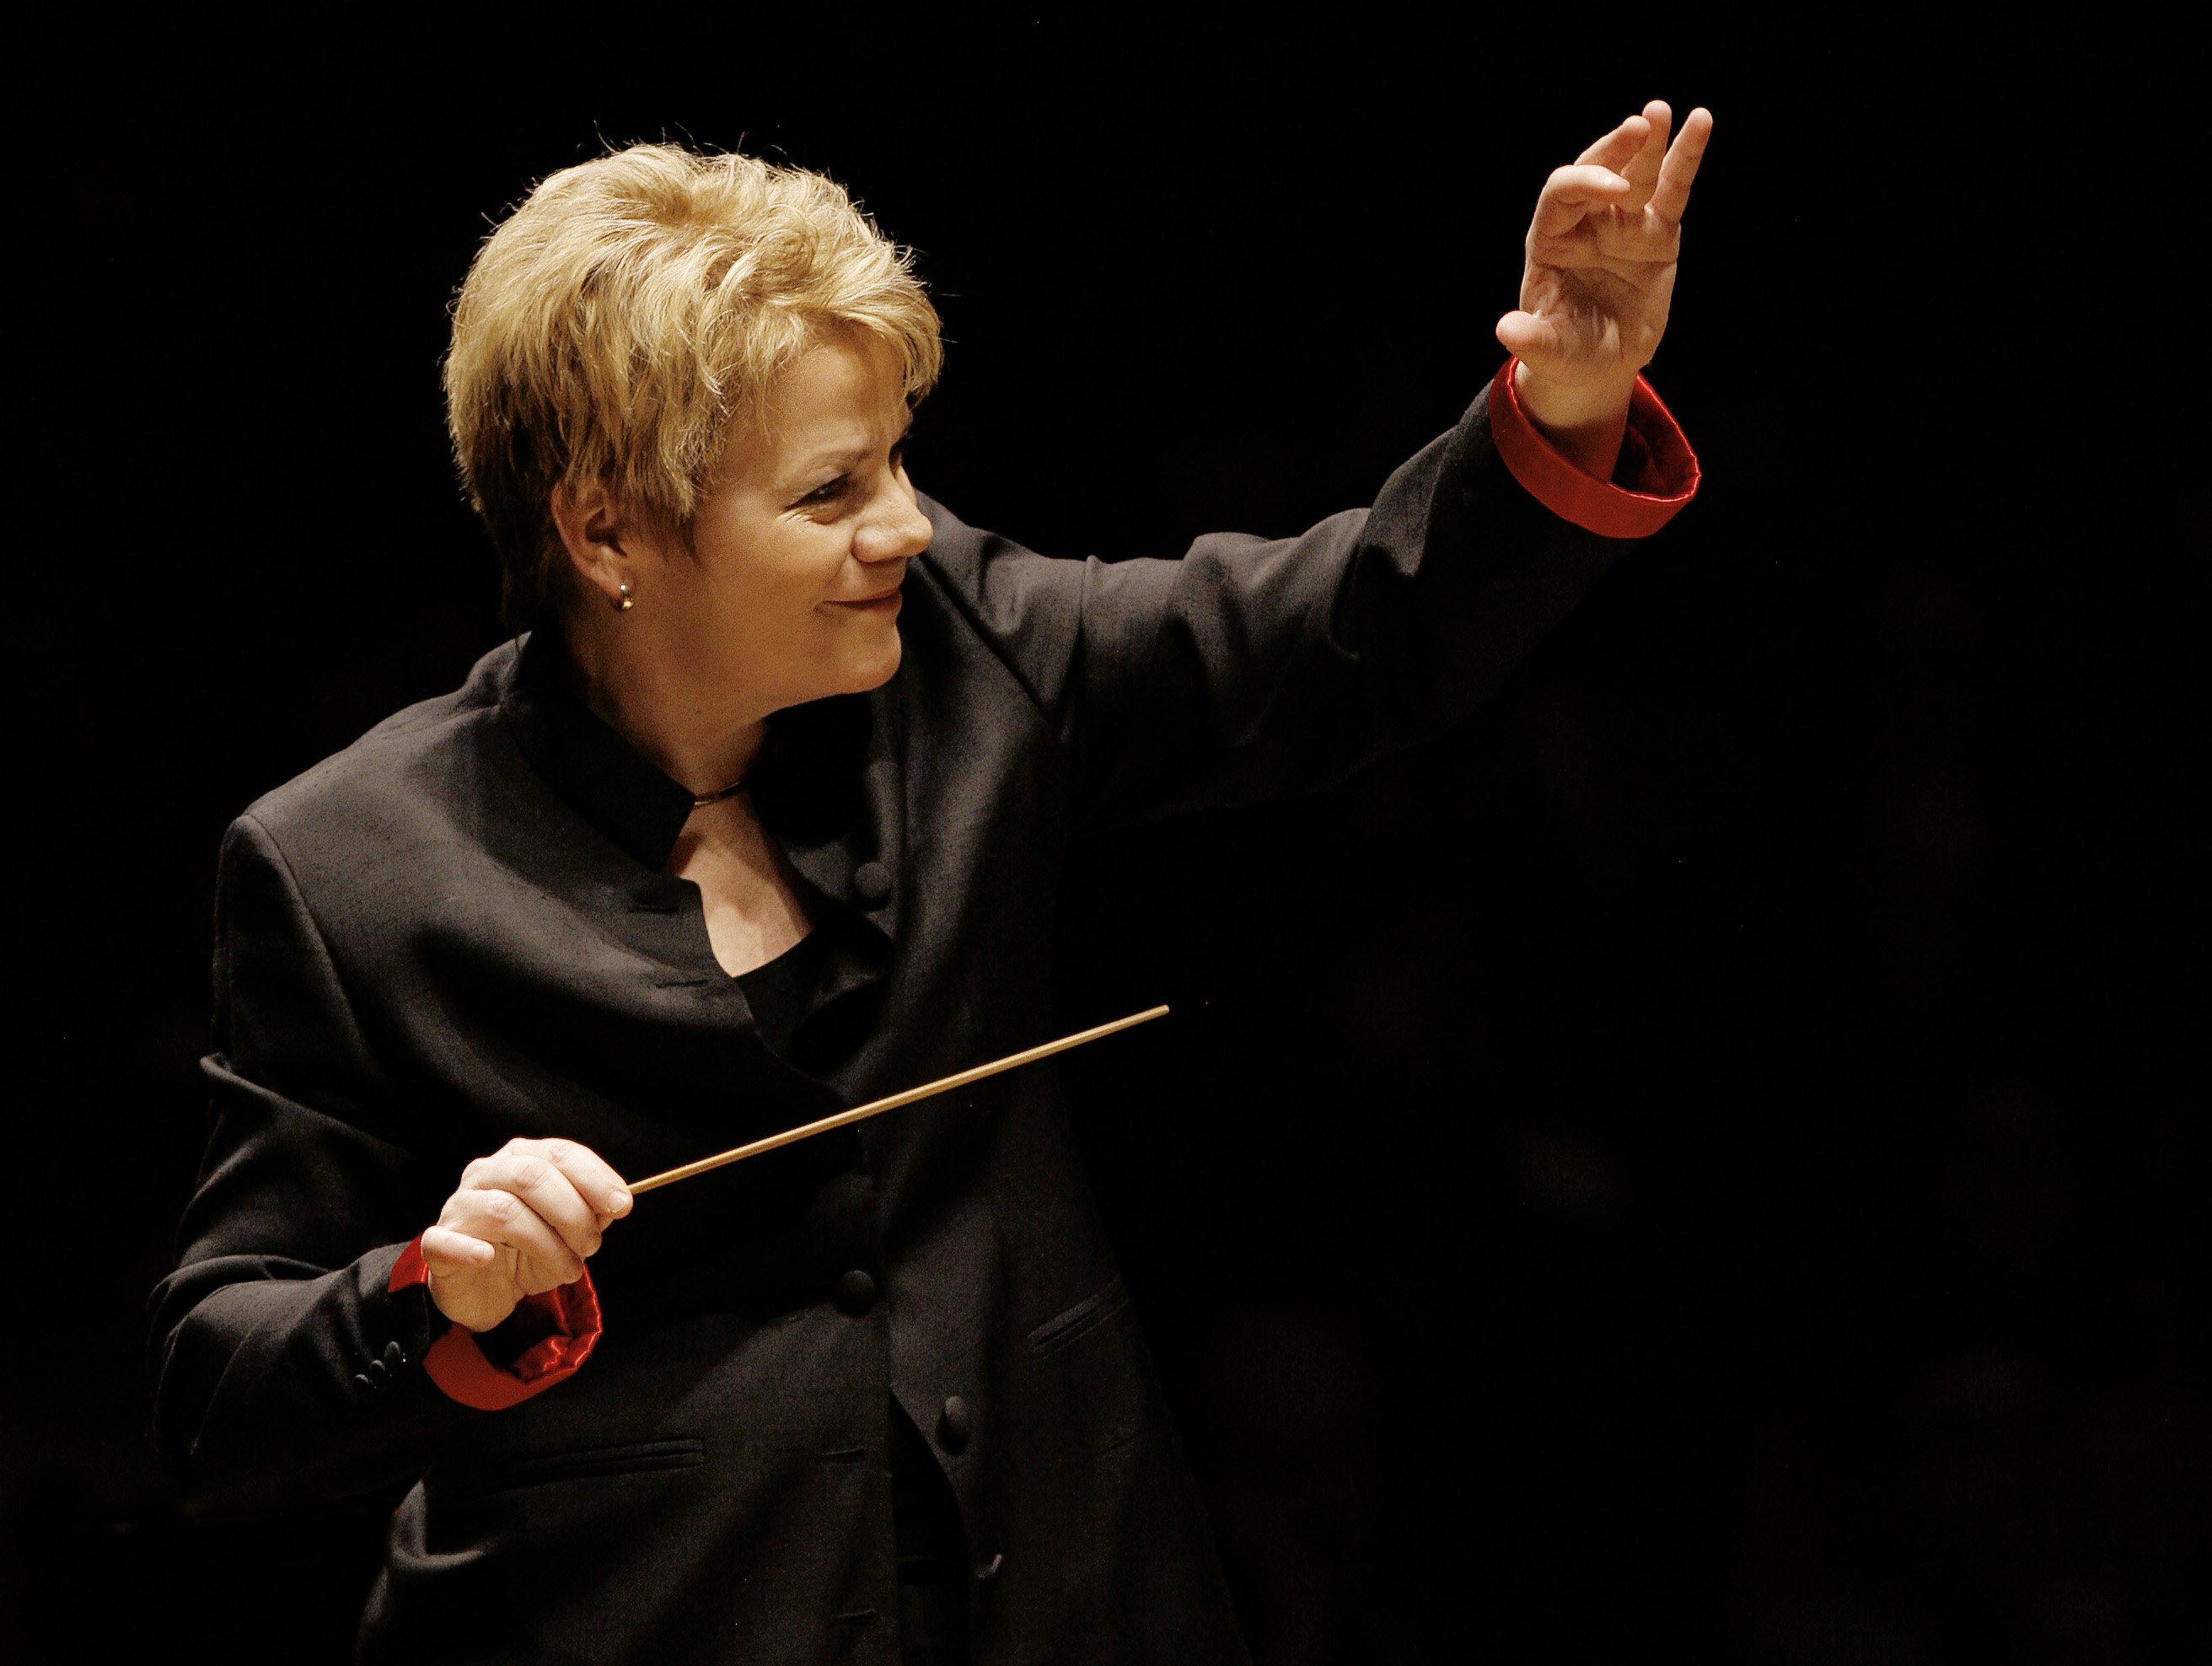 World-renowned conductor Marin Alsop confirmed for NCH Female Conductor Programme